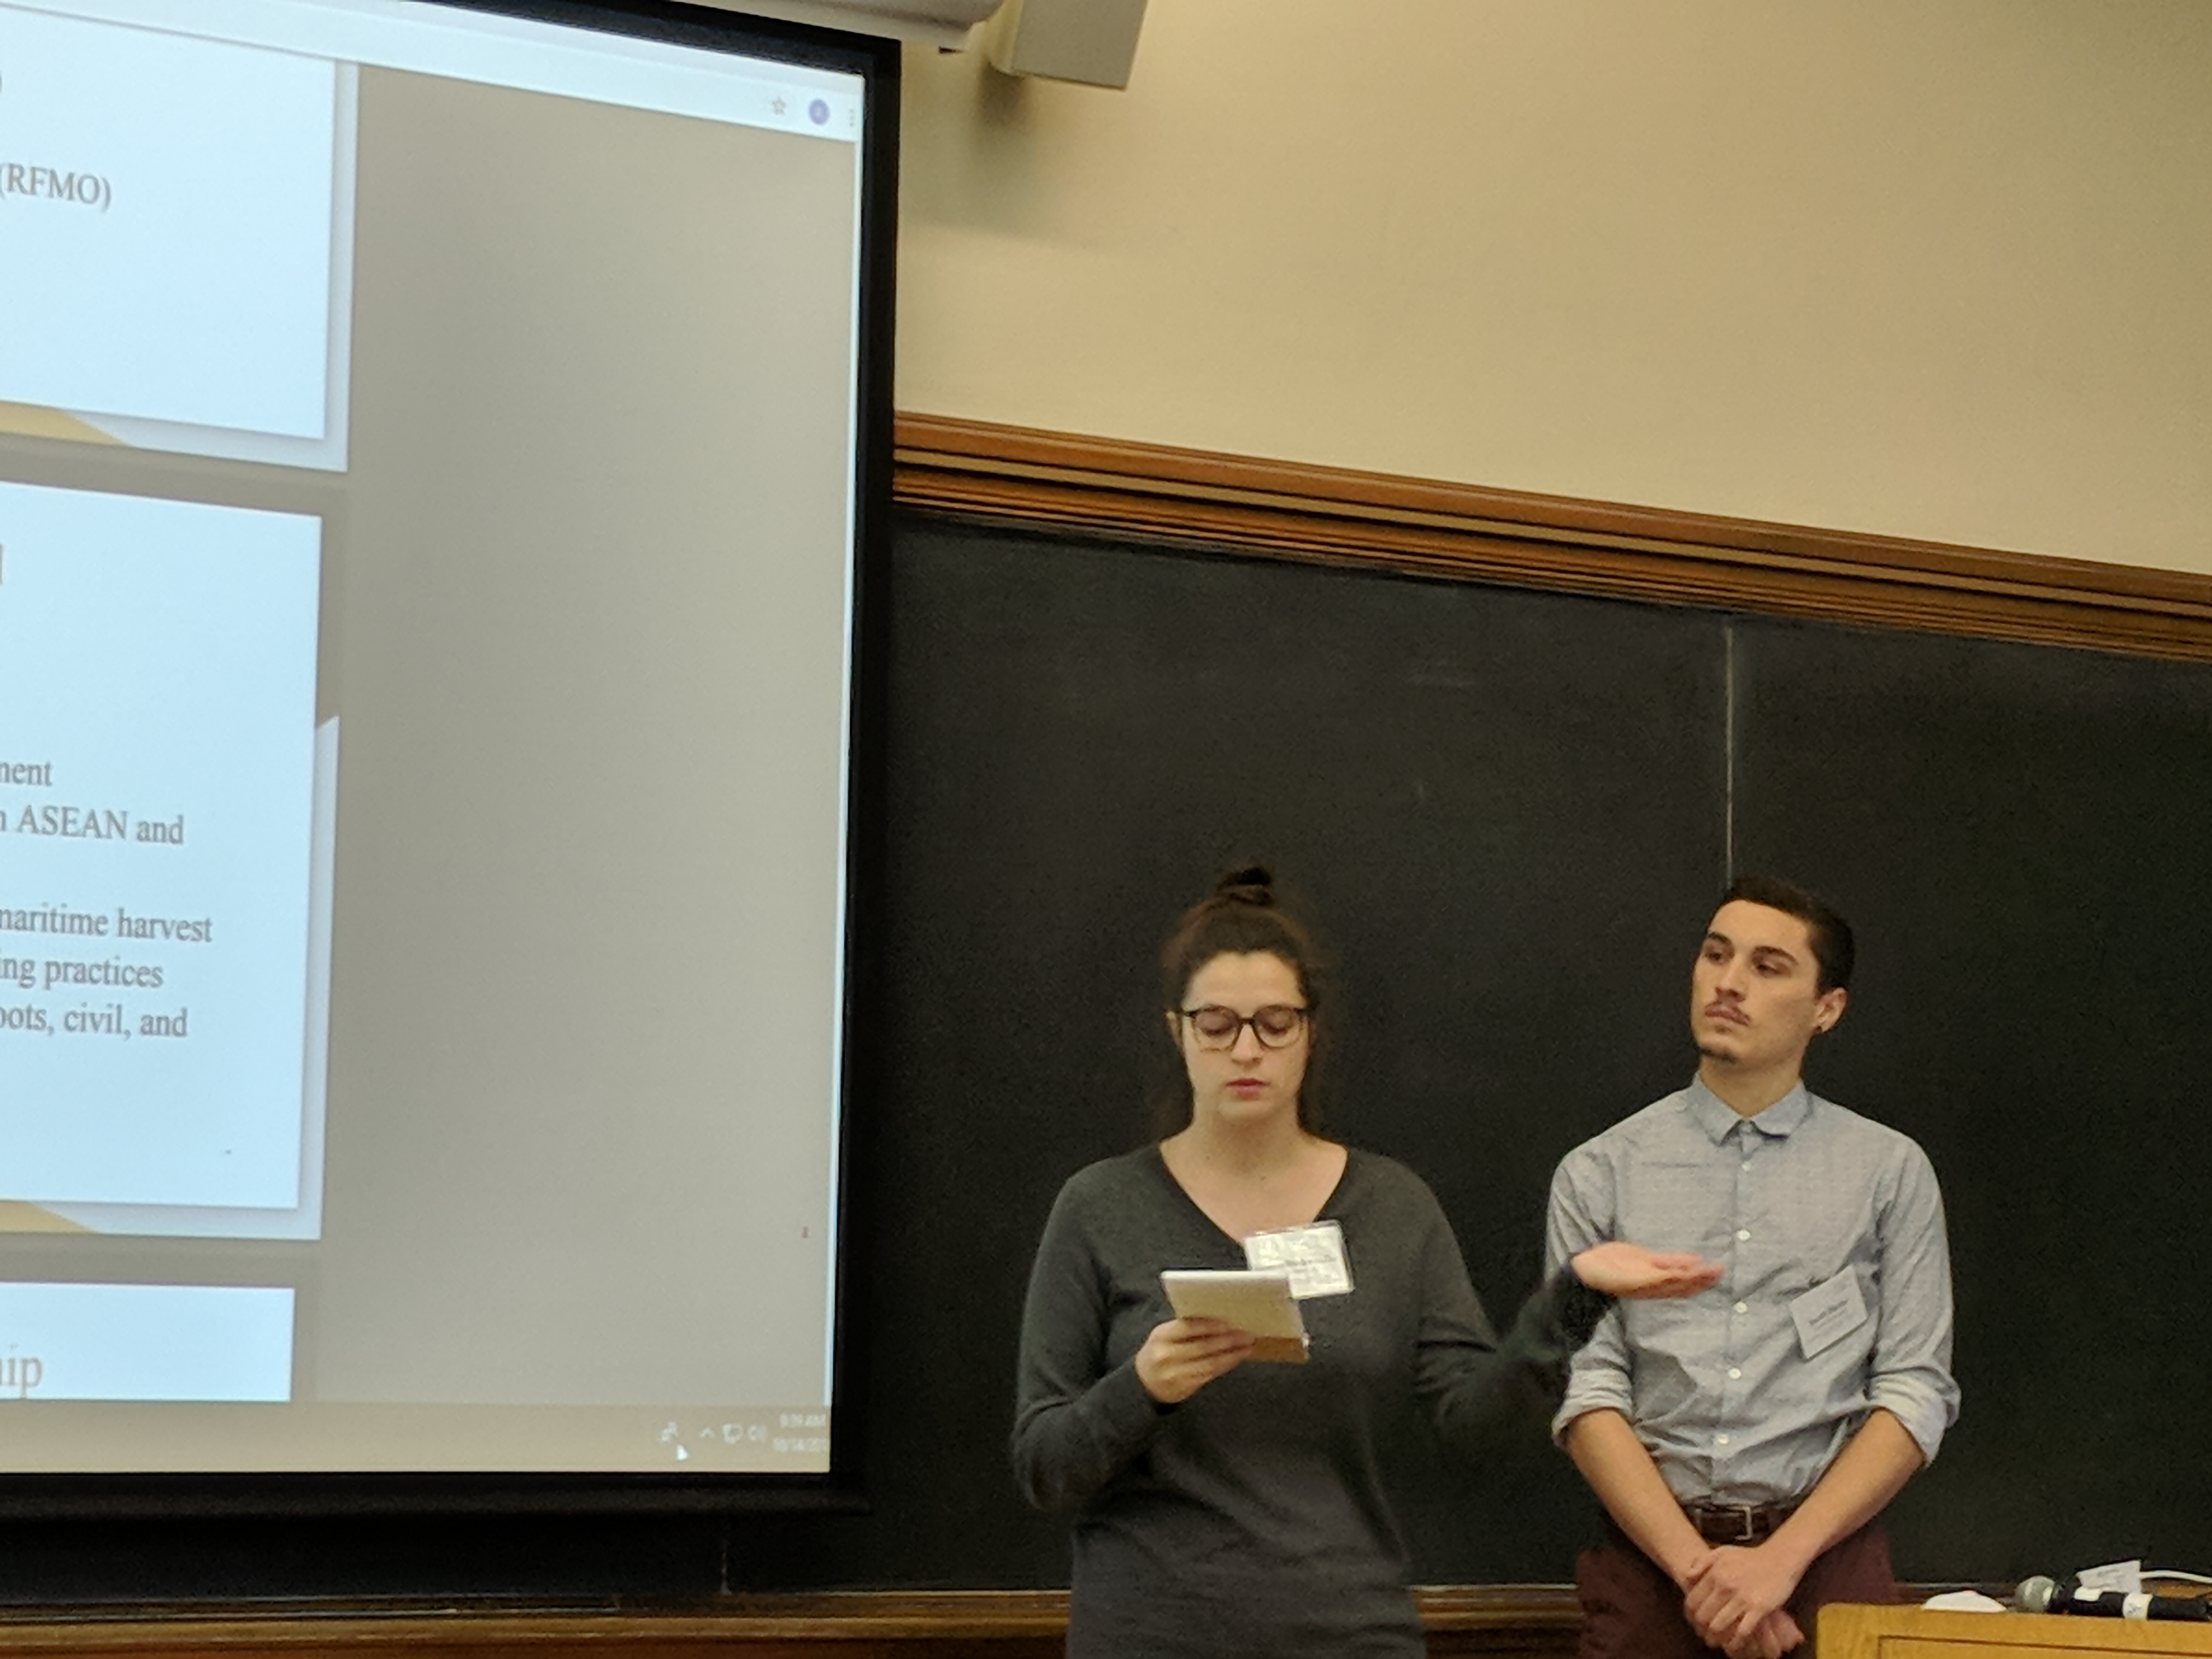 Students Kolette Bodenmiller and Jacob Hicks stand in front of a blackboard at Yale and present during the policy competition